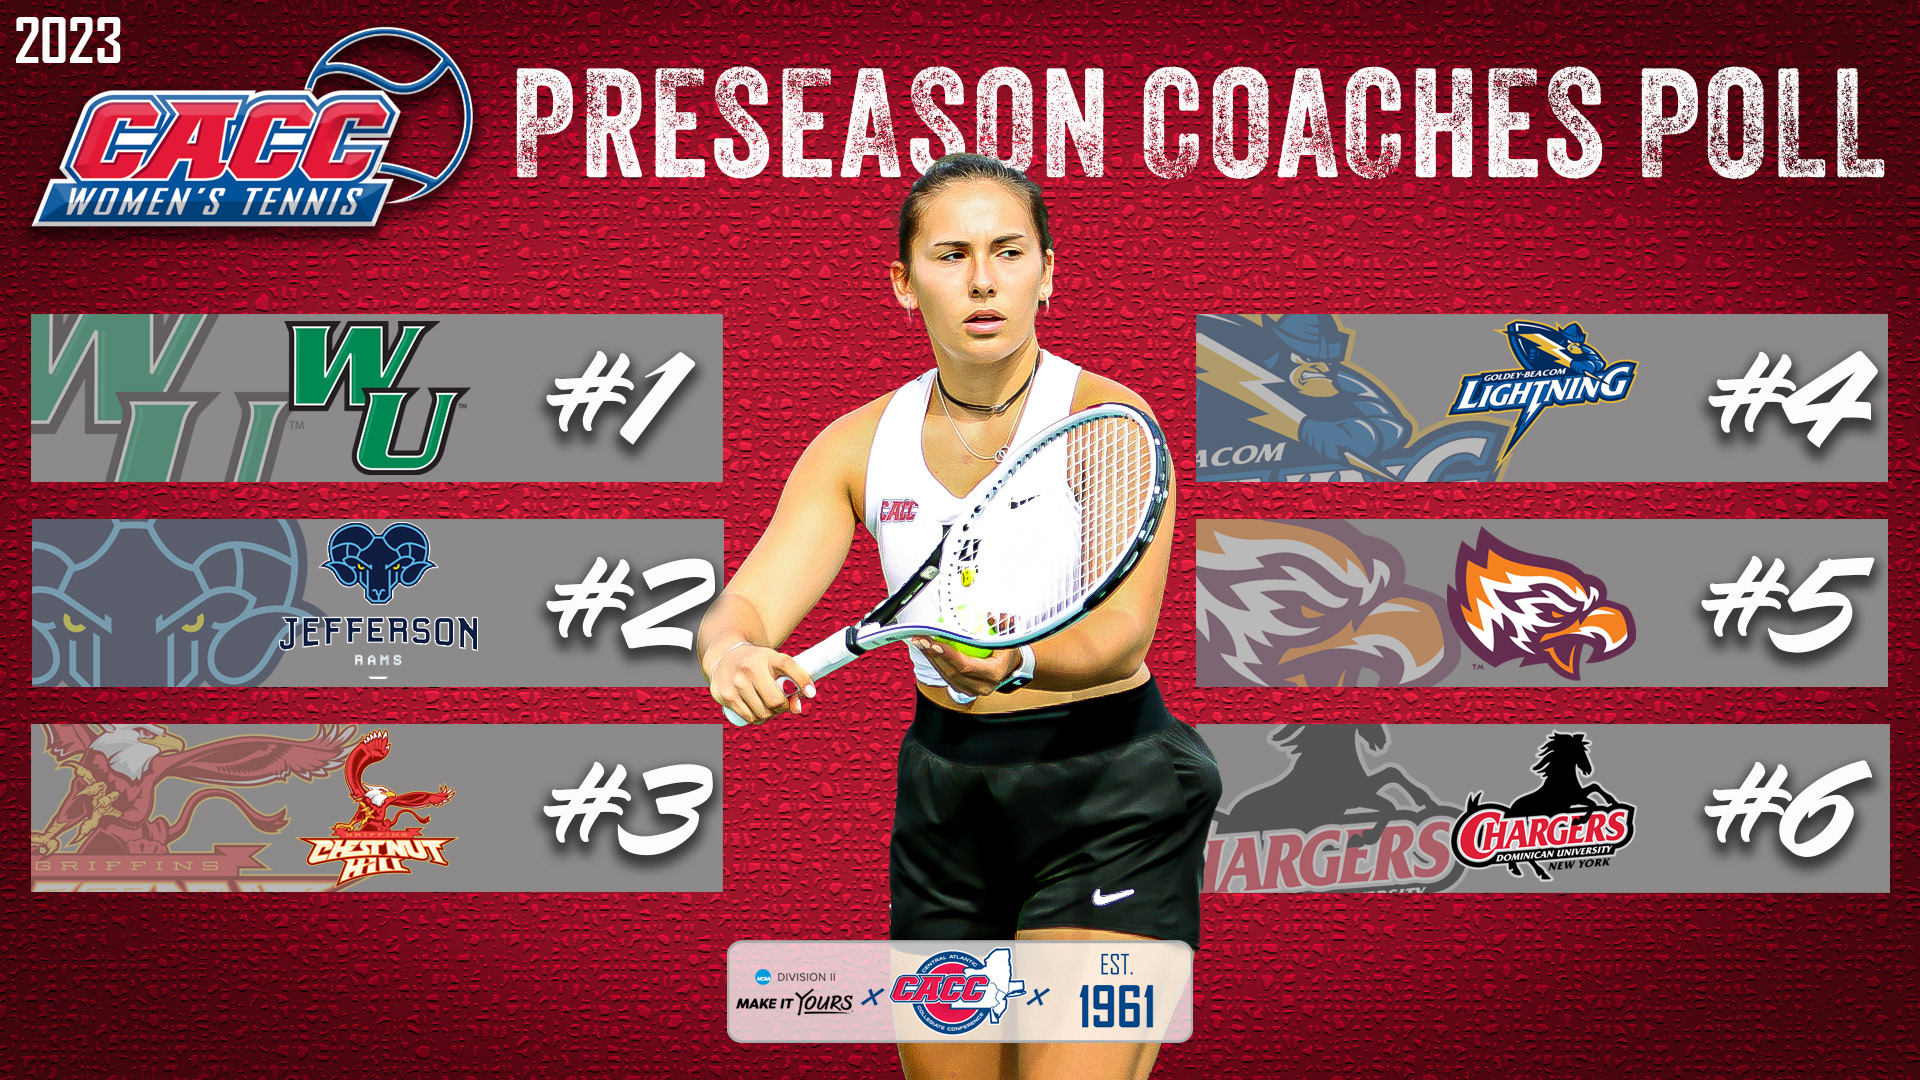 2x Defending Champ WilmU Picked 1st in '23 CACC WTEN Preseason Poll